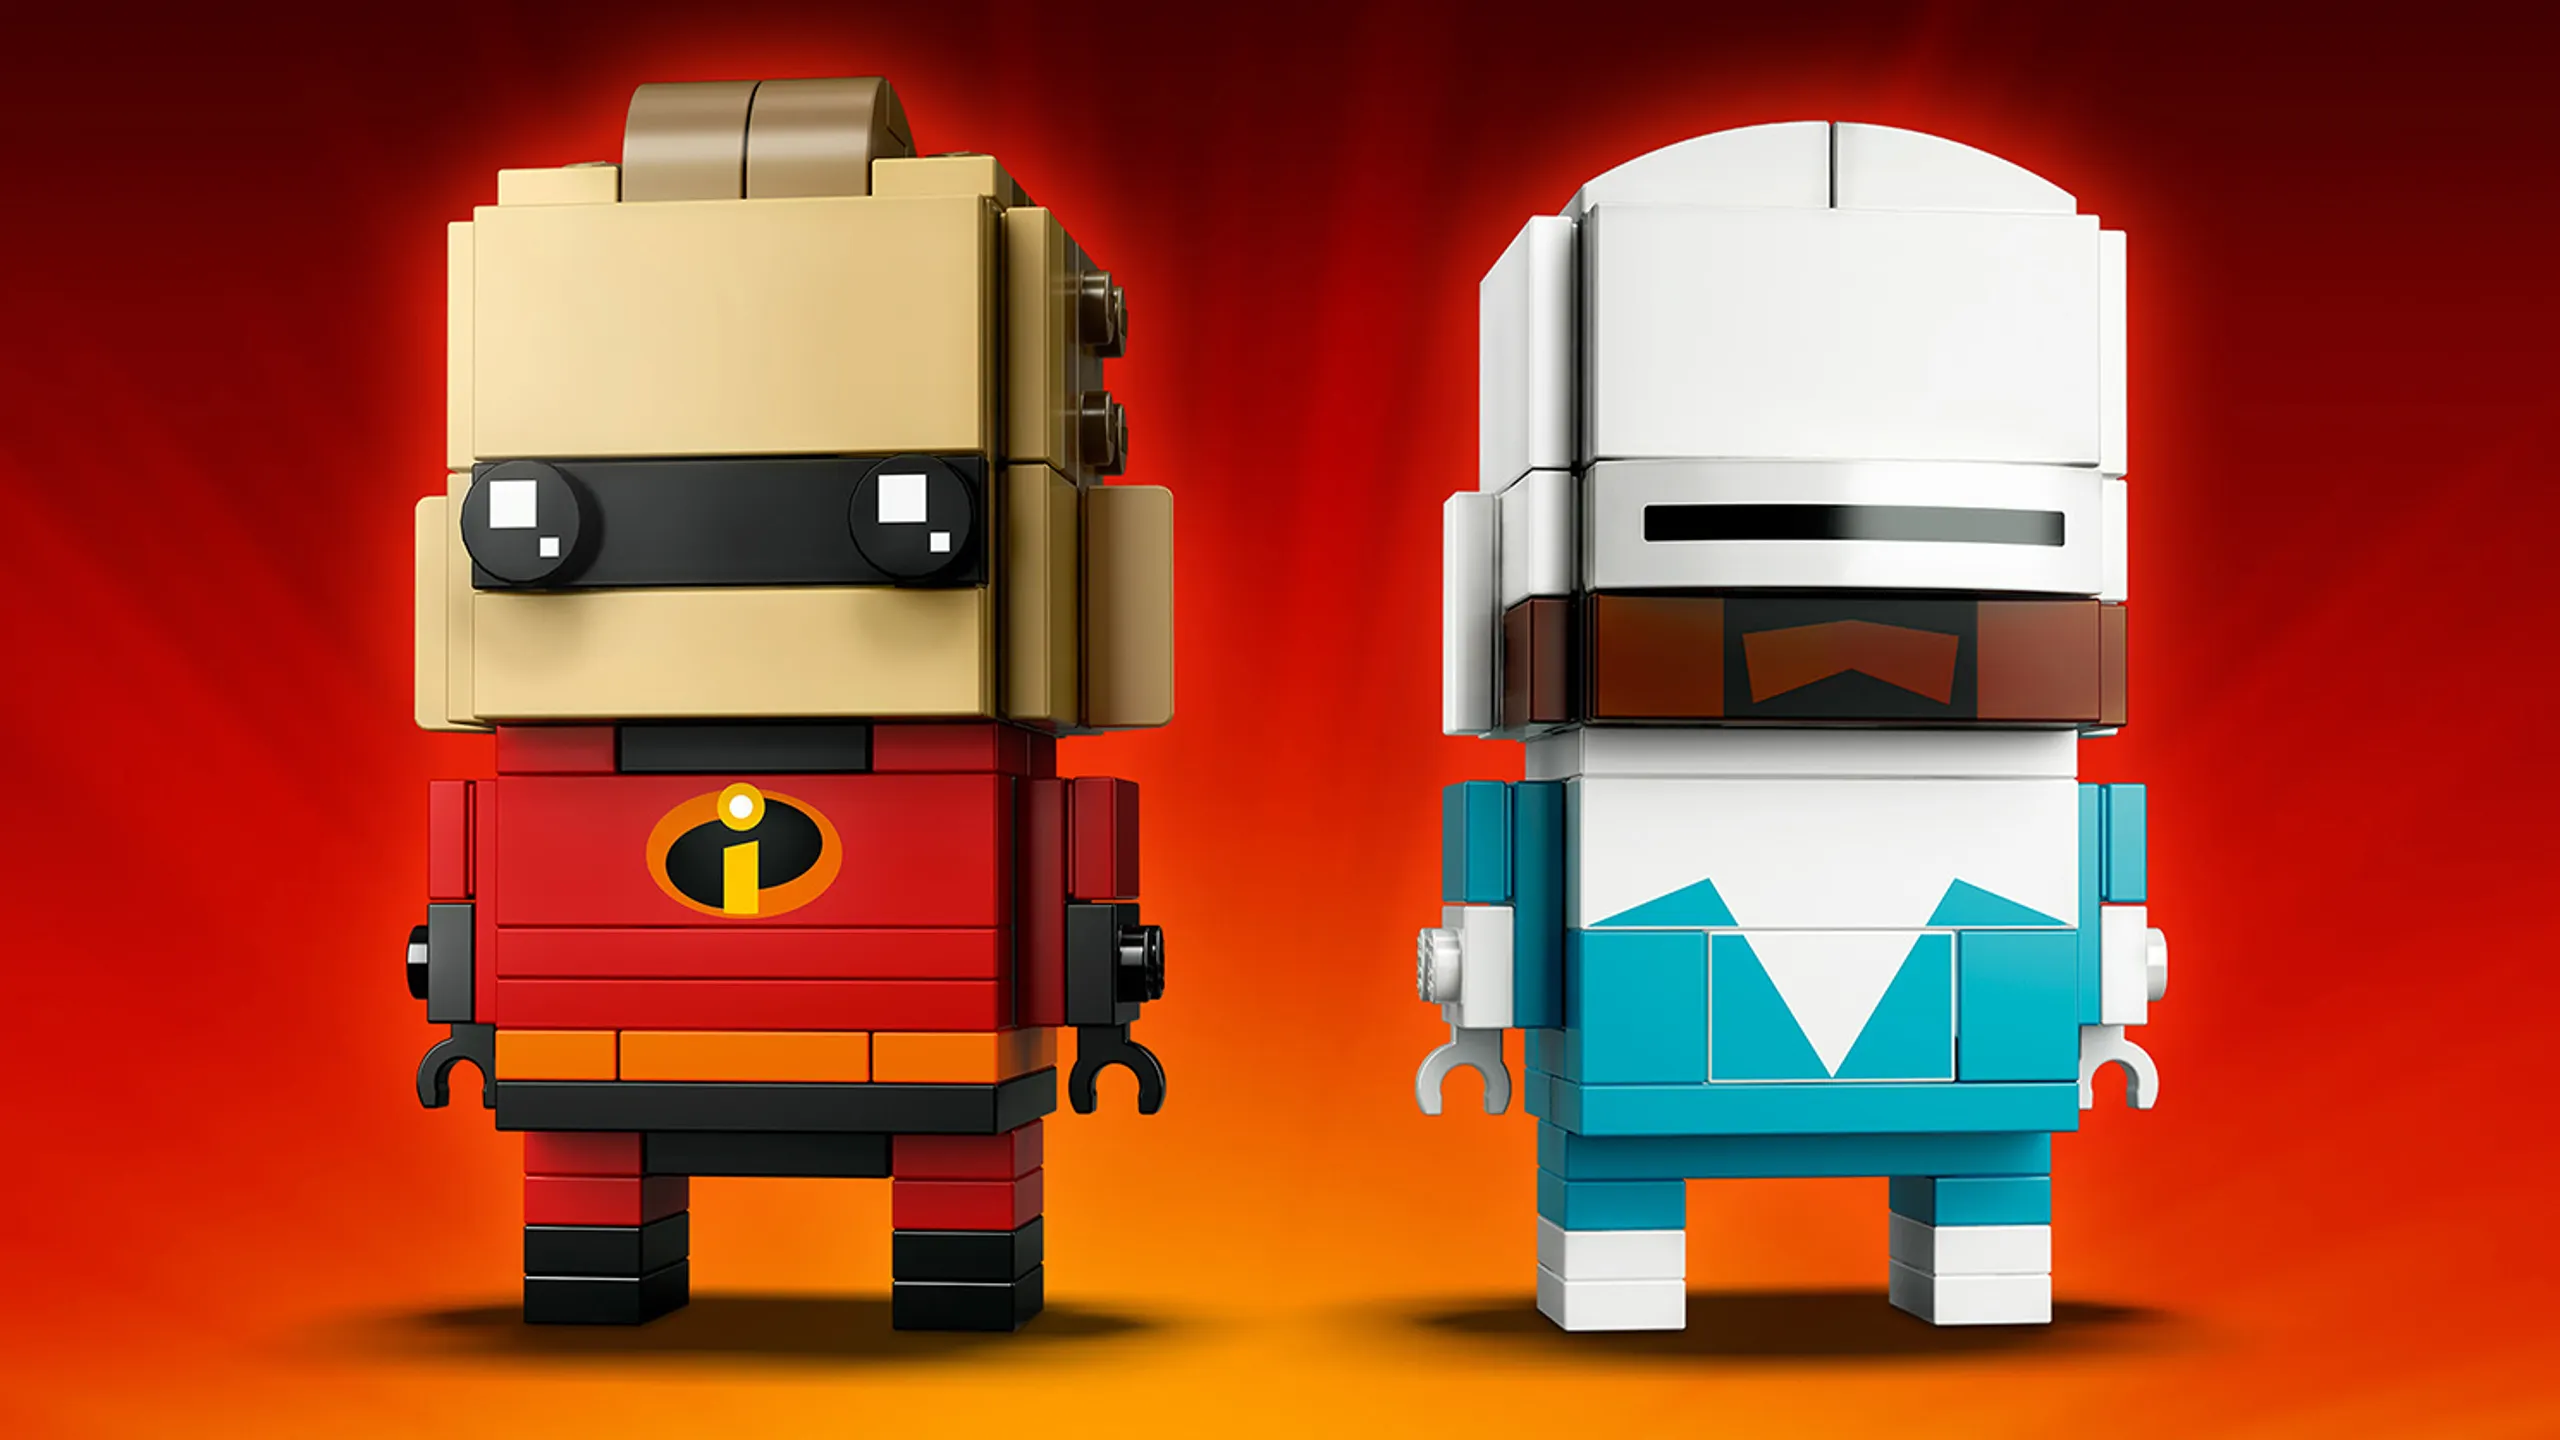 LEGO Brickheadz - 41613 Mr. Incredible and Frozone - Build two LEGO Brickheadz figures of Mr. Incredible in his red suit and Frozone in a white and icy blue suit.